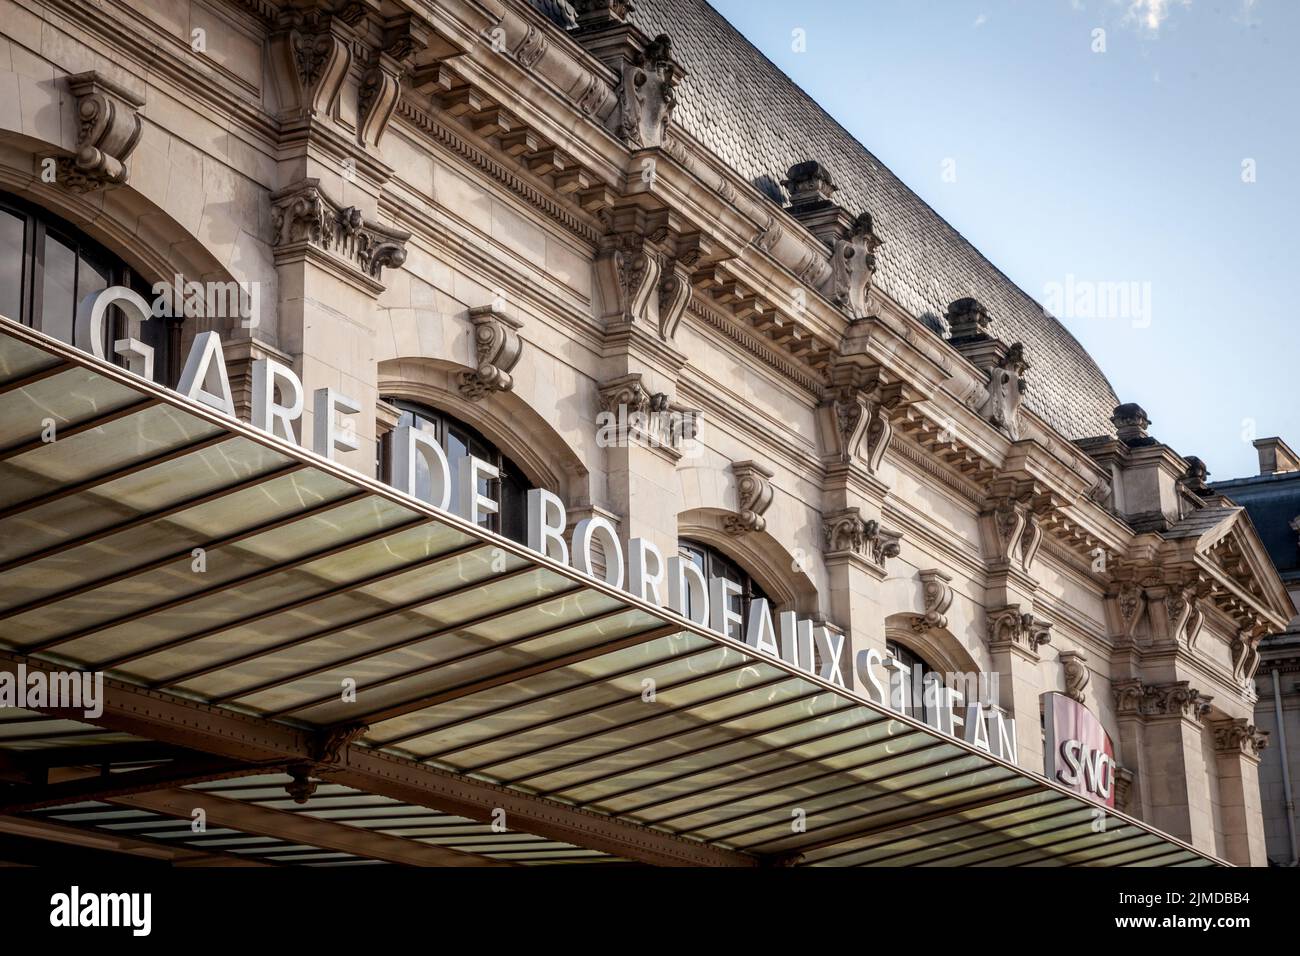 Picture of the entrance of Bordeaux Saint Jean train station, belonging to SNCF. Bordeaux-Saint-Jean or formerly Bordeaux-Midi is the main railway sta Stock Photo